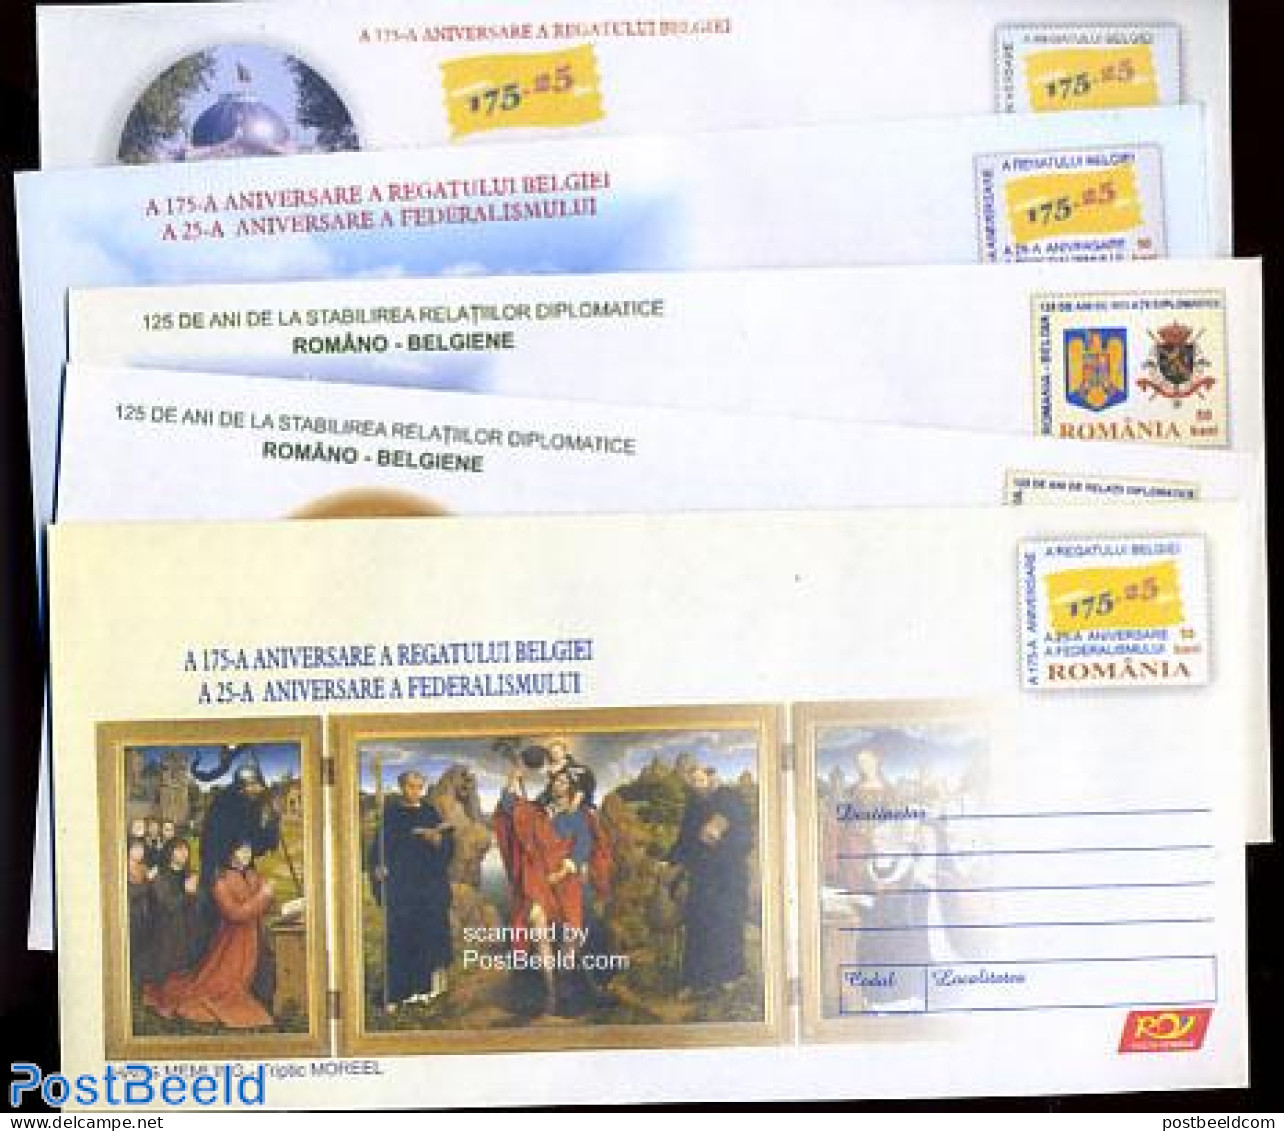 Romania 2006 Envelope Set, Belgian Connections (5 Covers), Unused Postal Stationary, Art - Architecture - Paintings - Covers & Documents